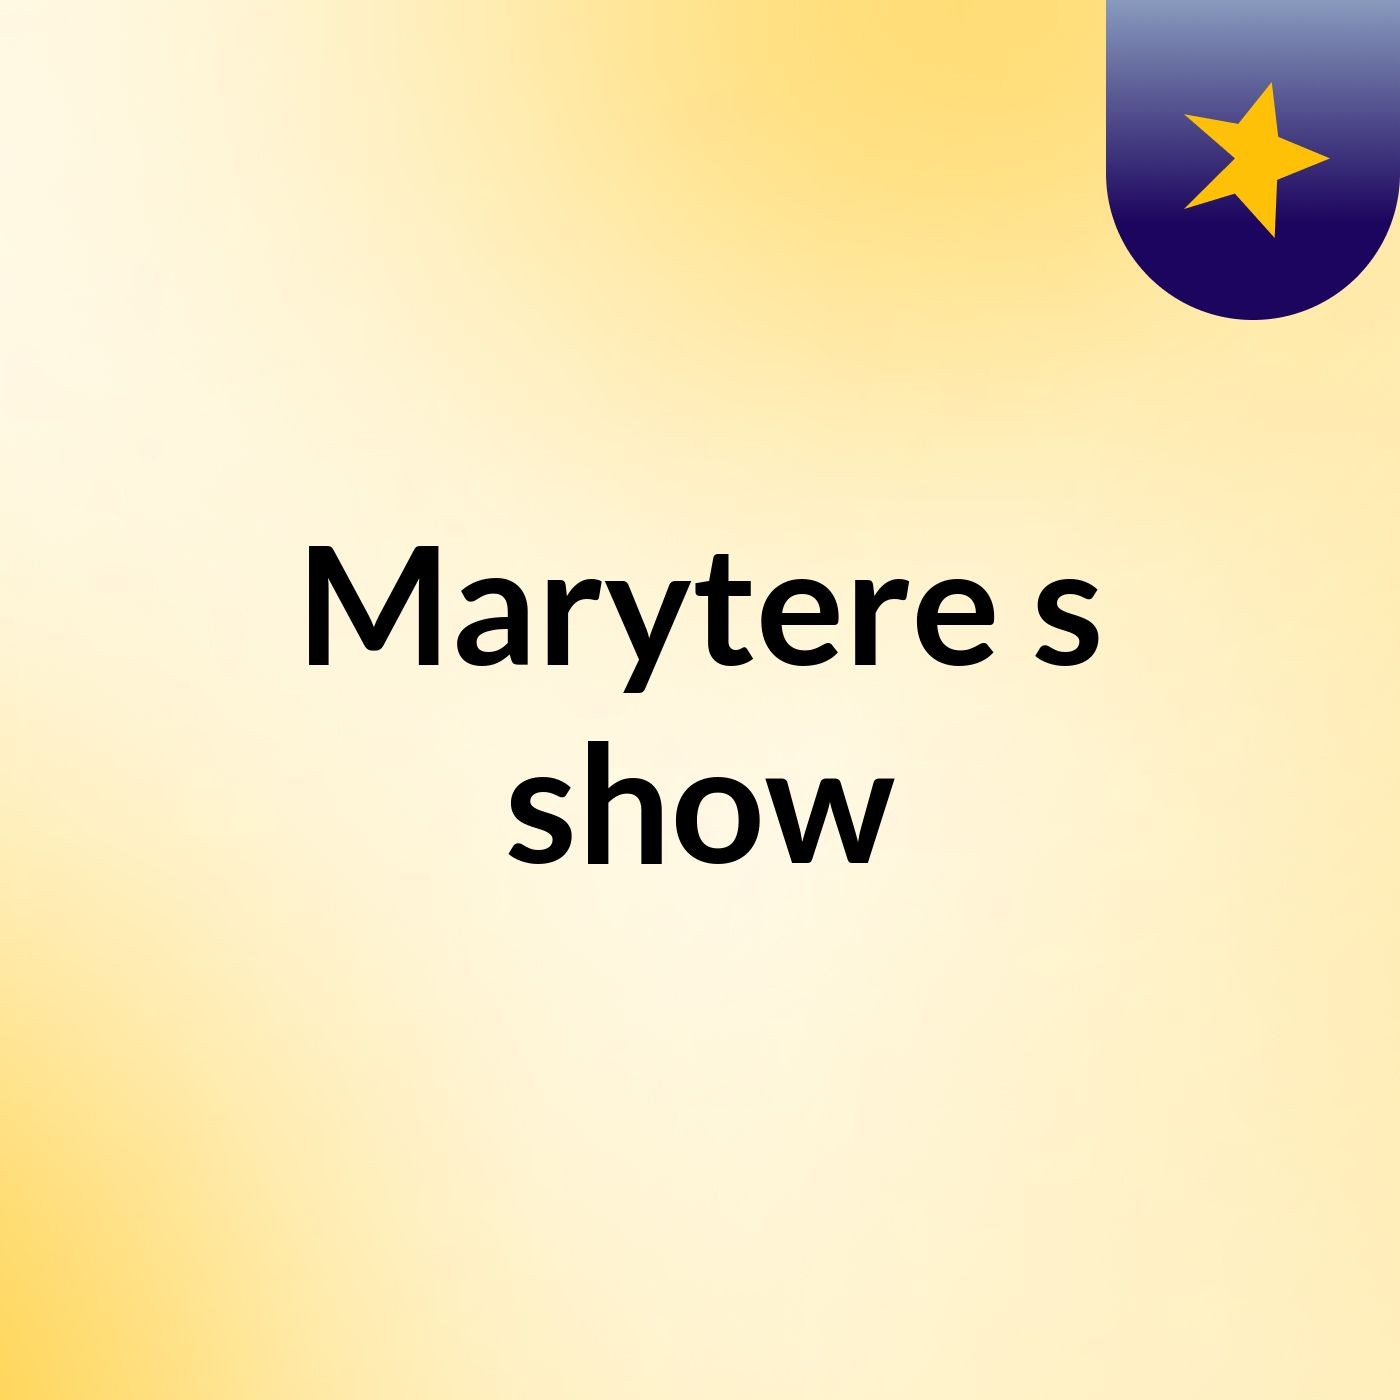 Marytere's show